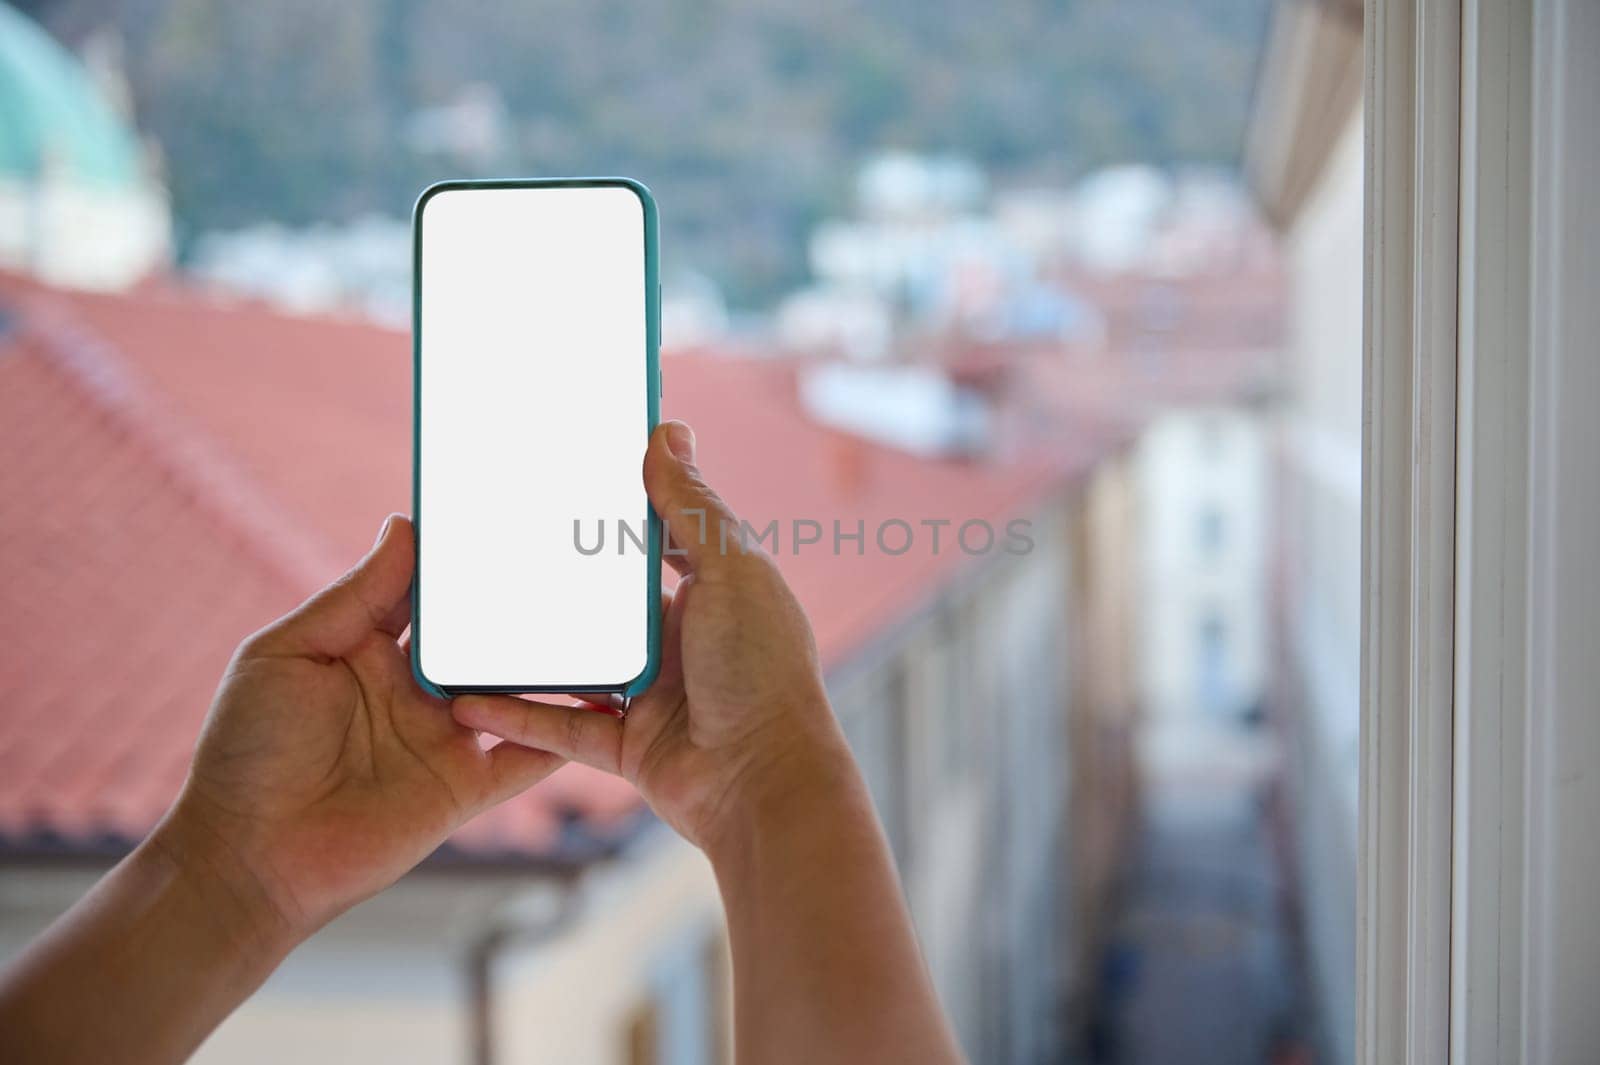 Hands hold smartphone with white blank mockup screen, against backdrop of beautiful city with houses with red roof tiles by artgf